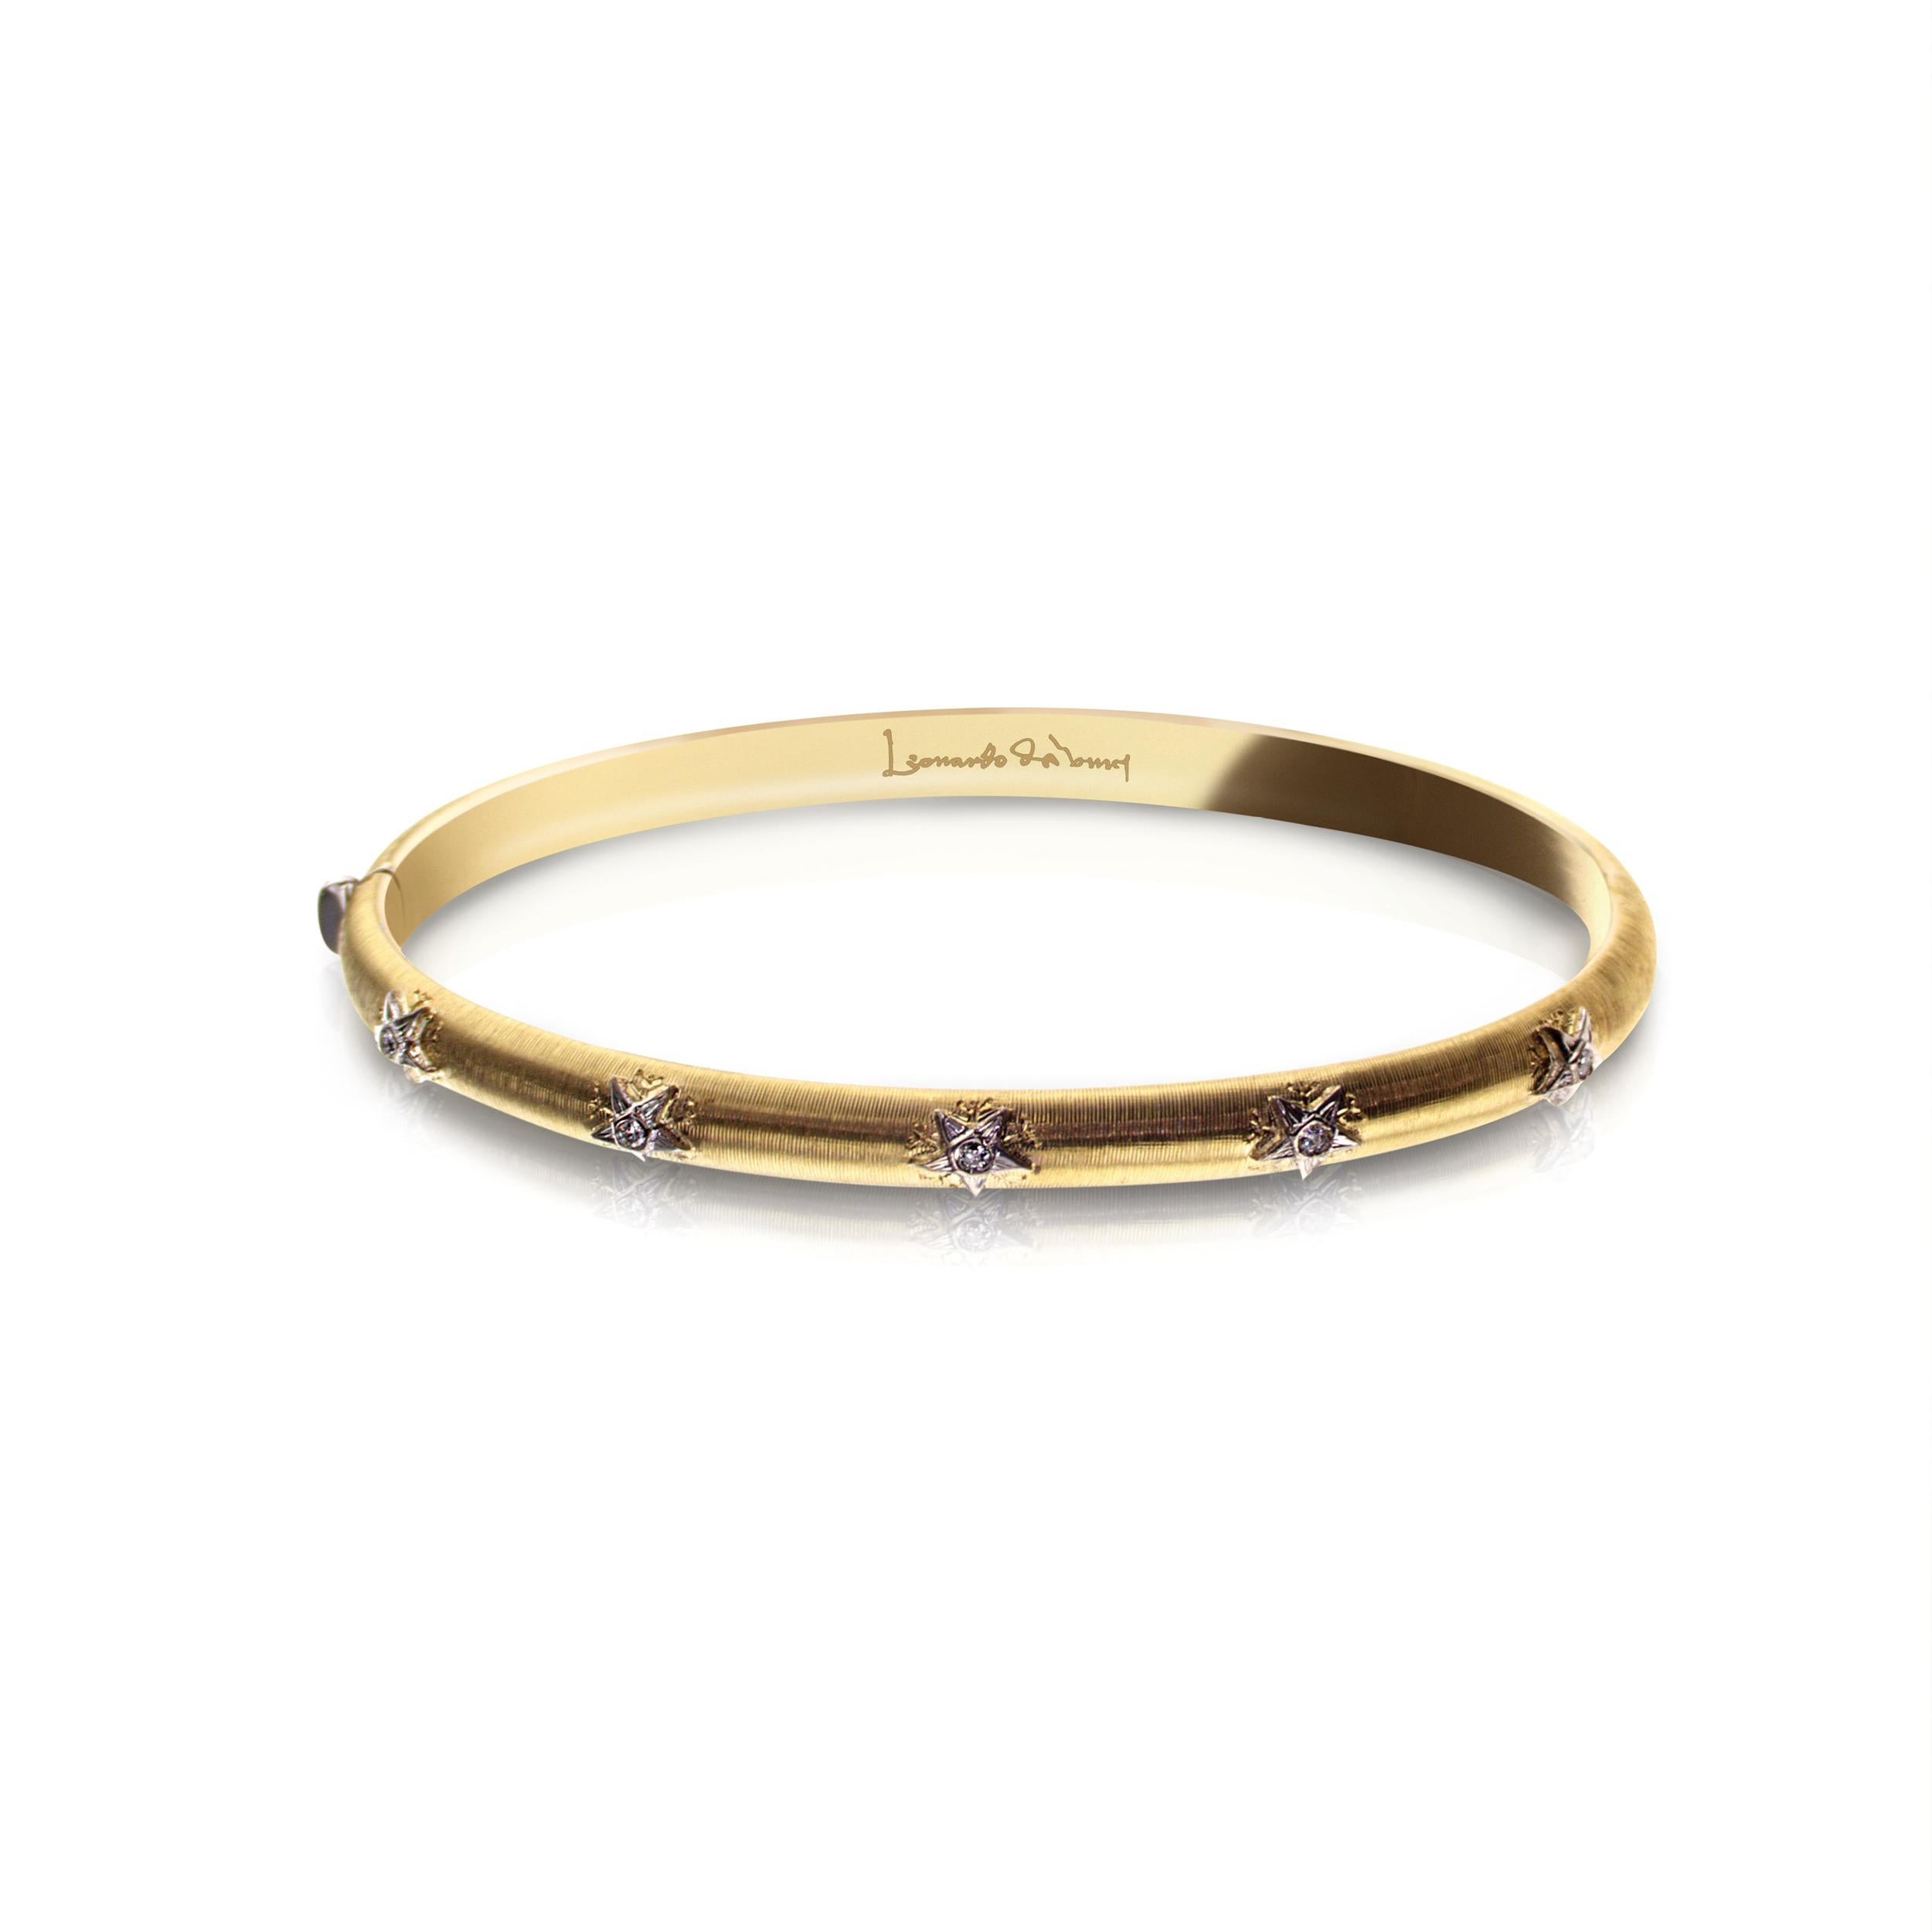 This 18Kt yellow Gold Caterina bangle was designed and inspired by Leonardo da Vinci's architectural drawings.

Decorated with 5 white Gold stars on the face of the bangle, with his internationally patented Leonardo da Vinci Cut diamonds within each